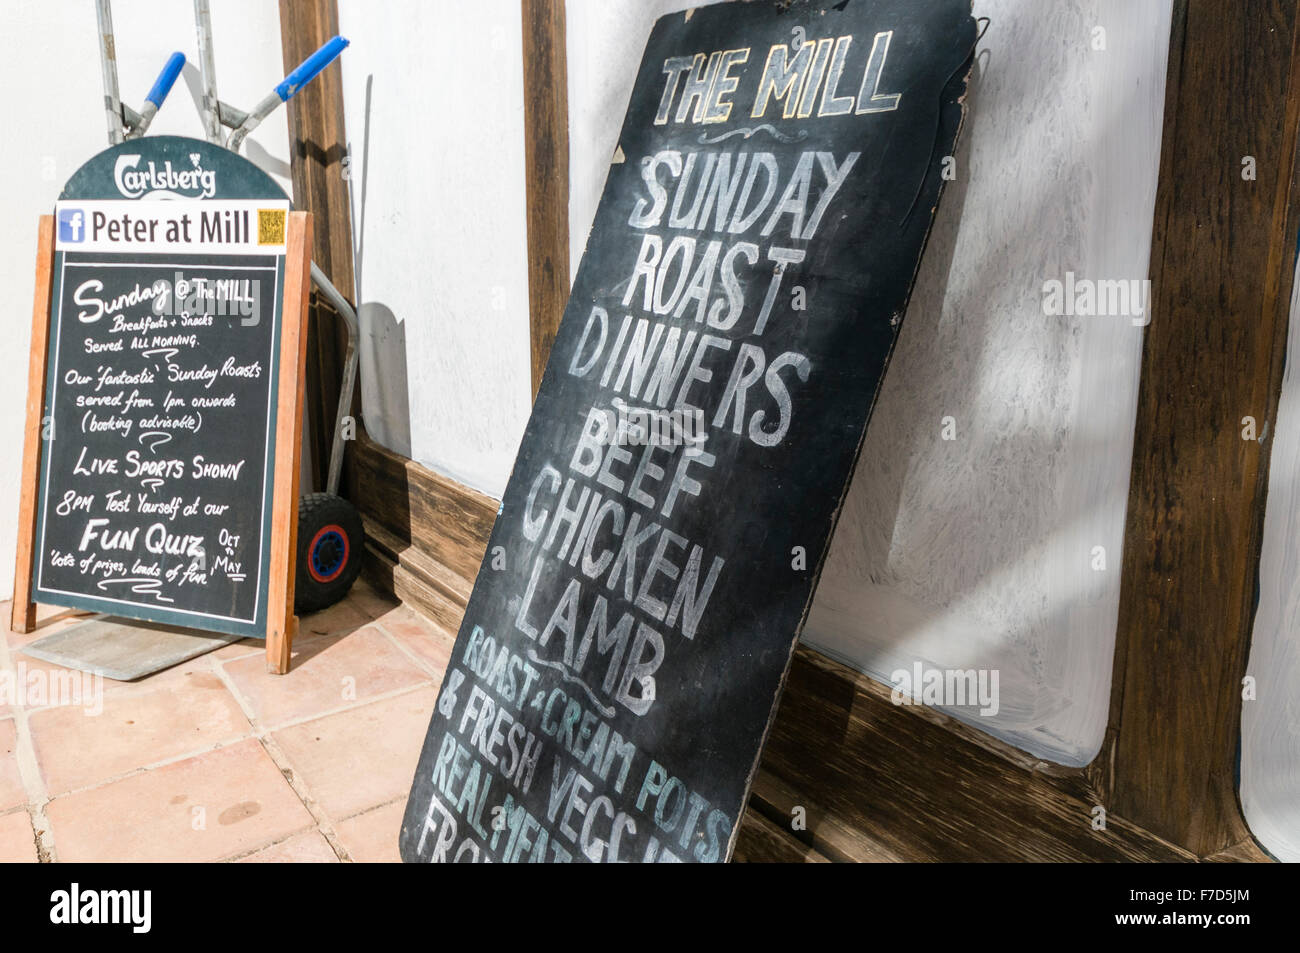 Signs outside an English pub in a Spanish holiday resort advertising Sunday Roast and other English meals. Stock Photo